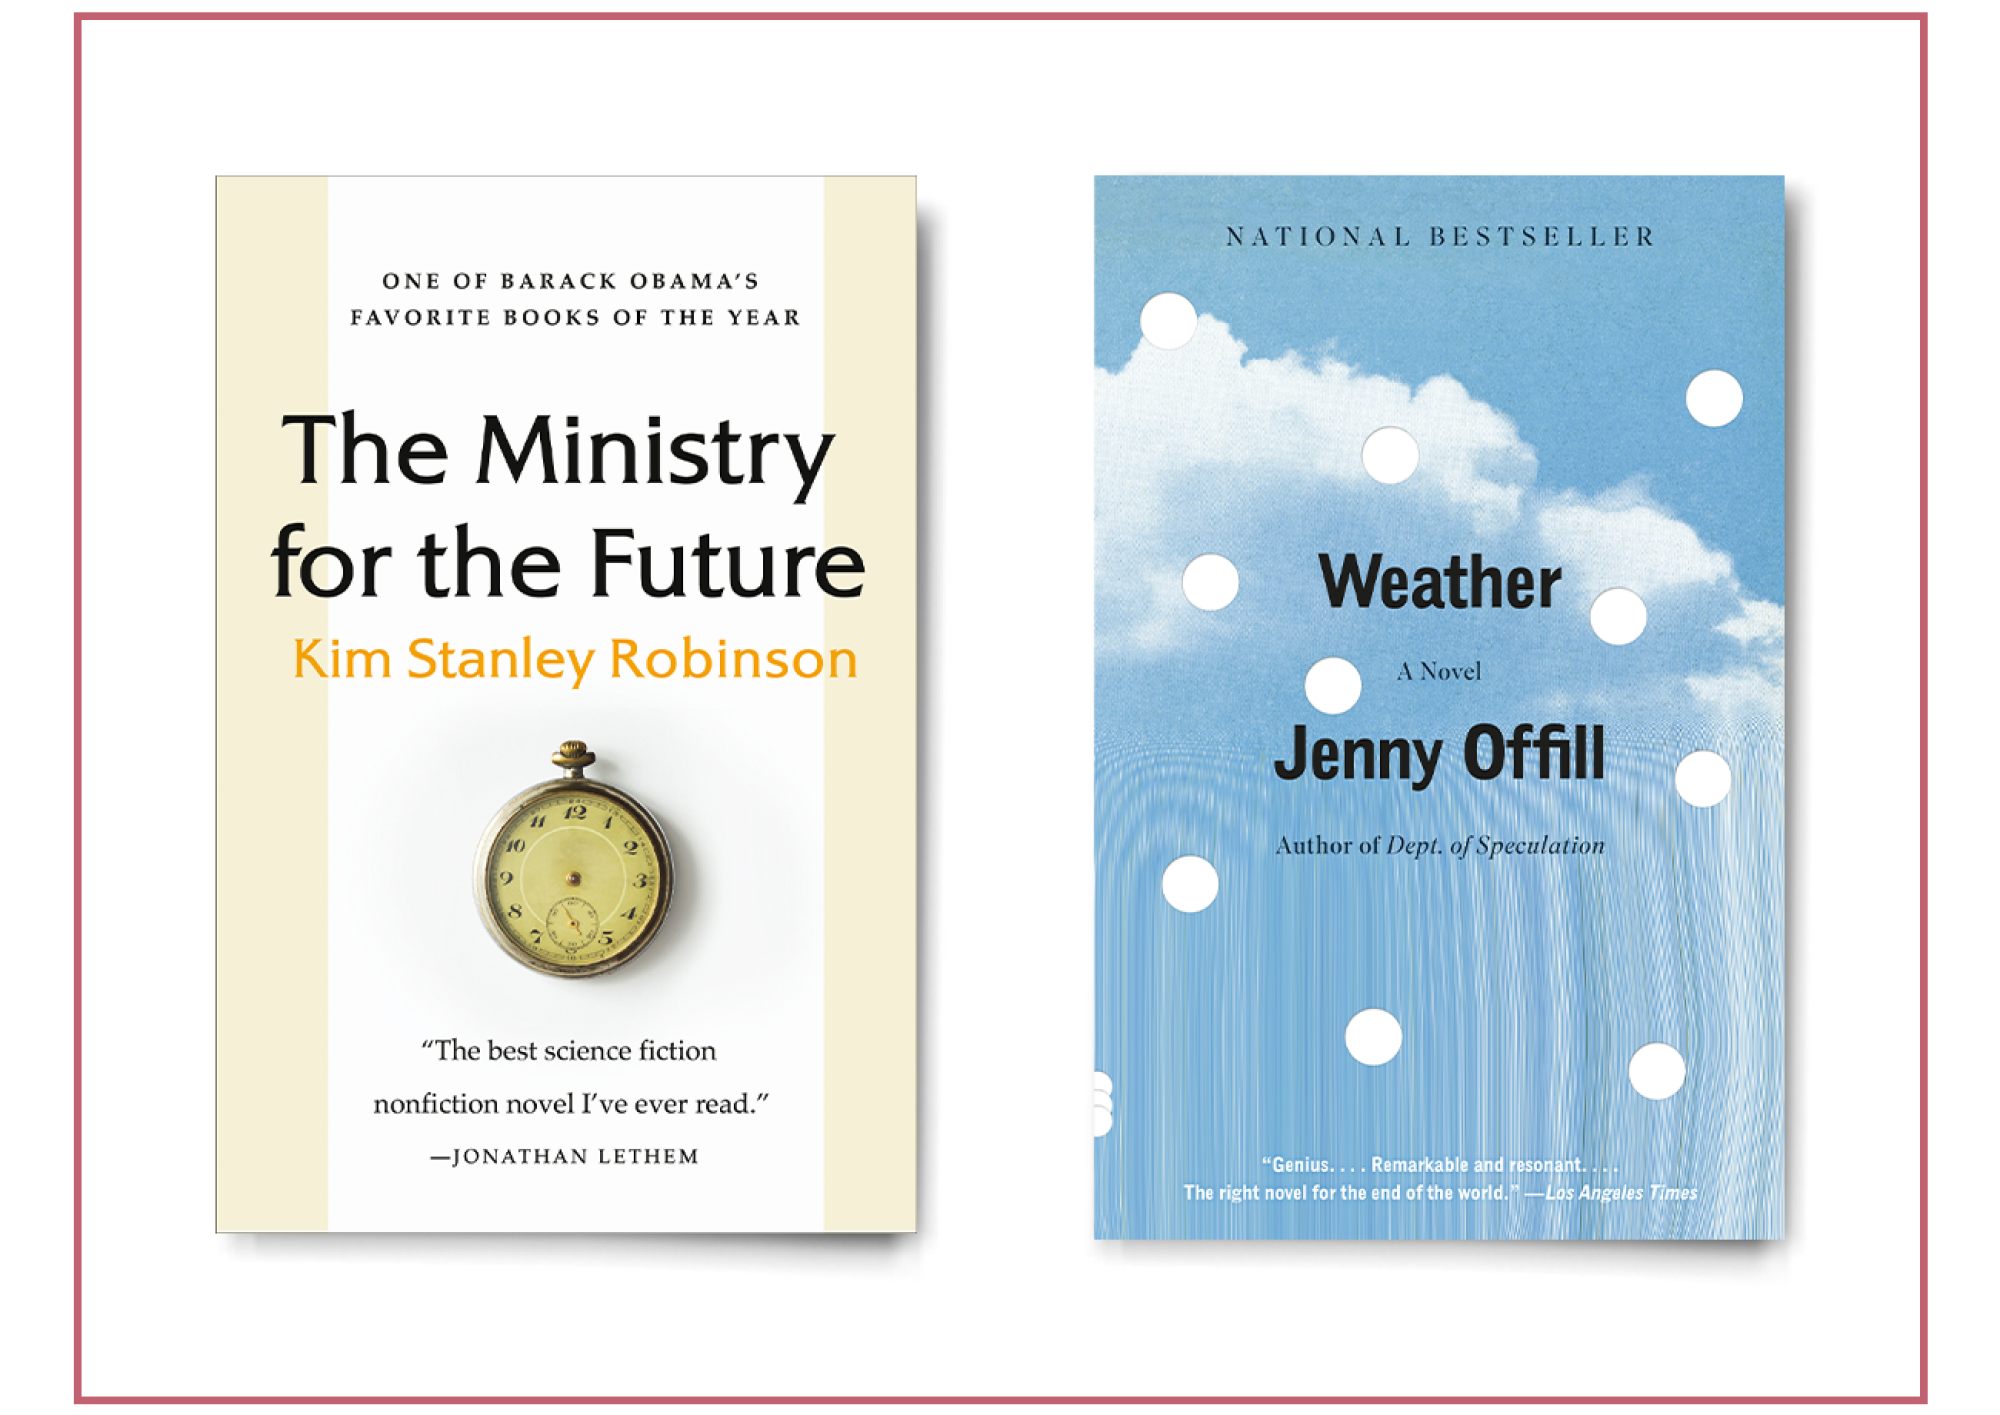 Book covers: "The Ministry for the Future" and "Weather"